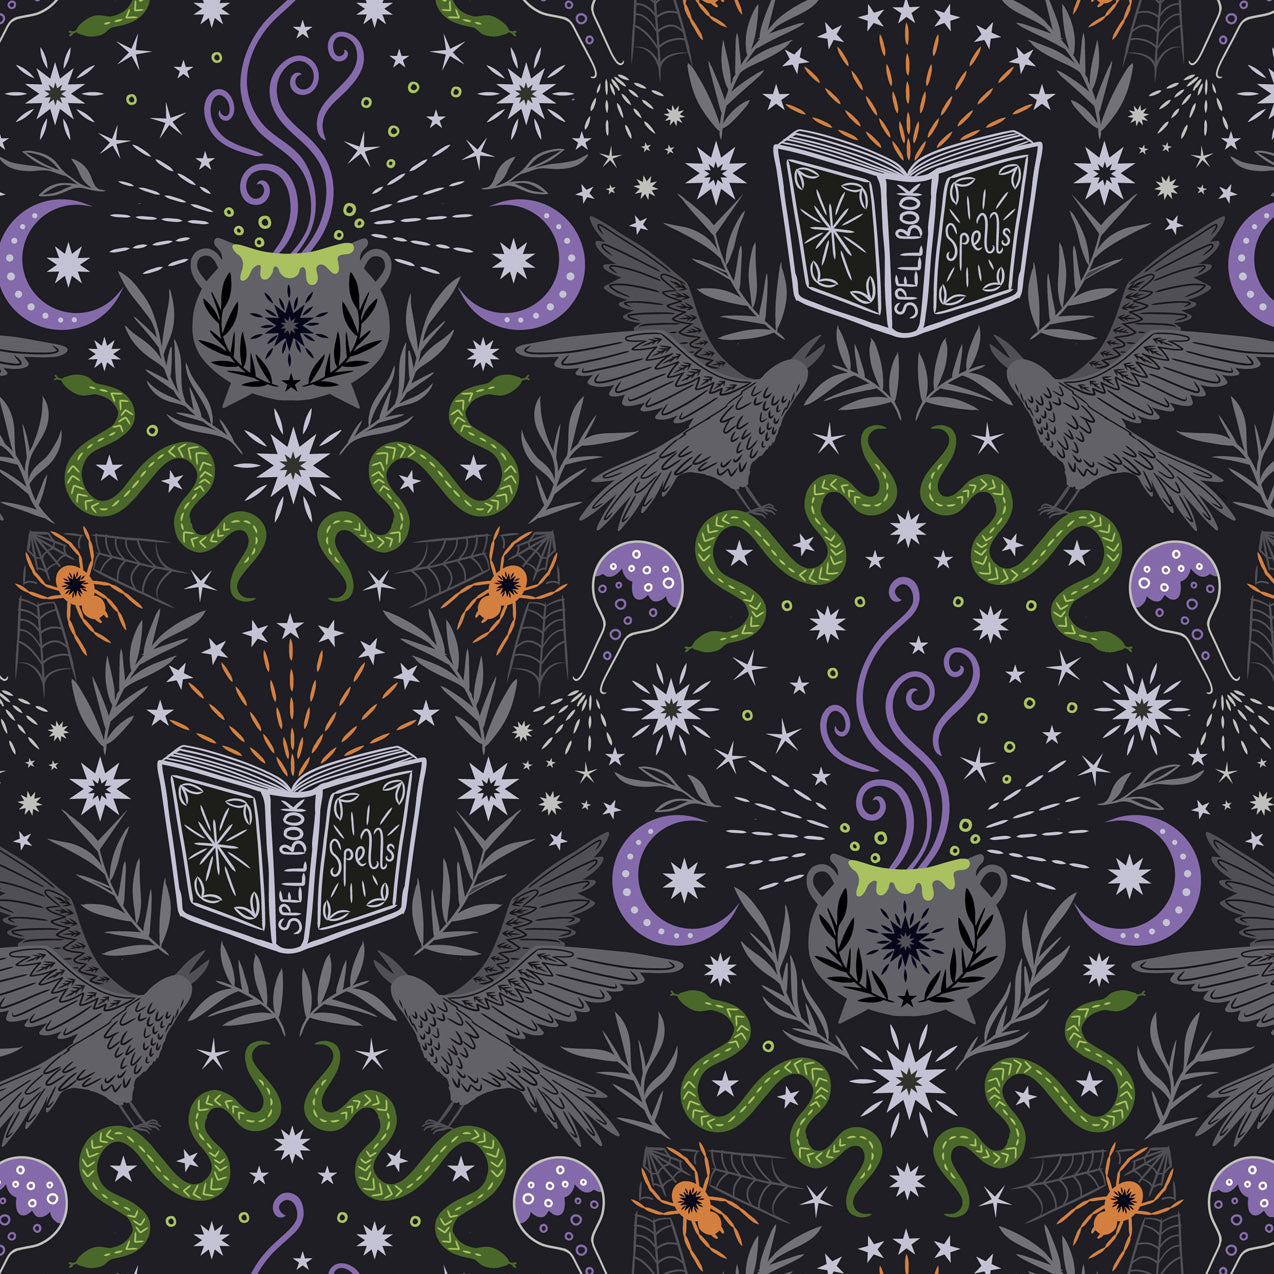 Lewis & Irene - Cast a Spell Fabric Collection